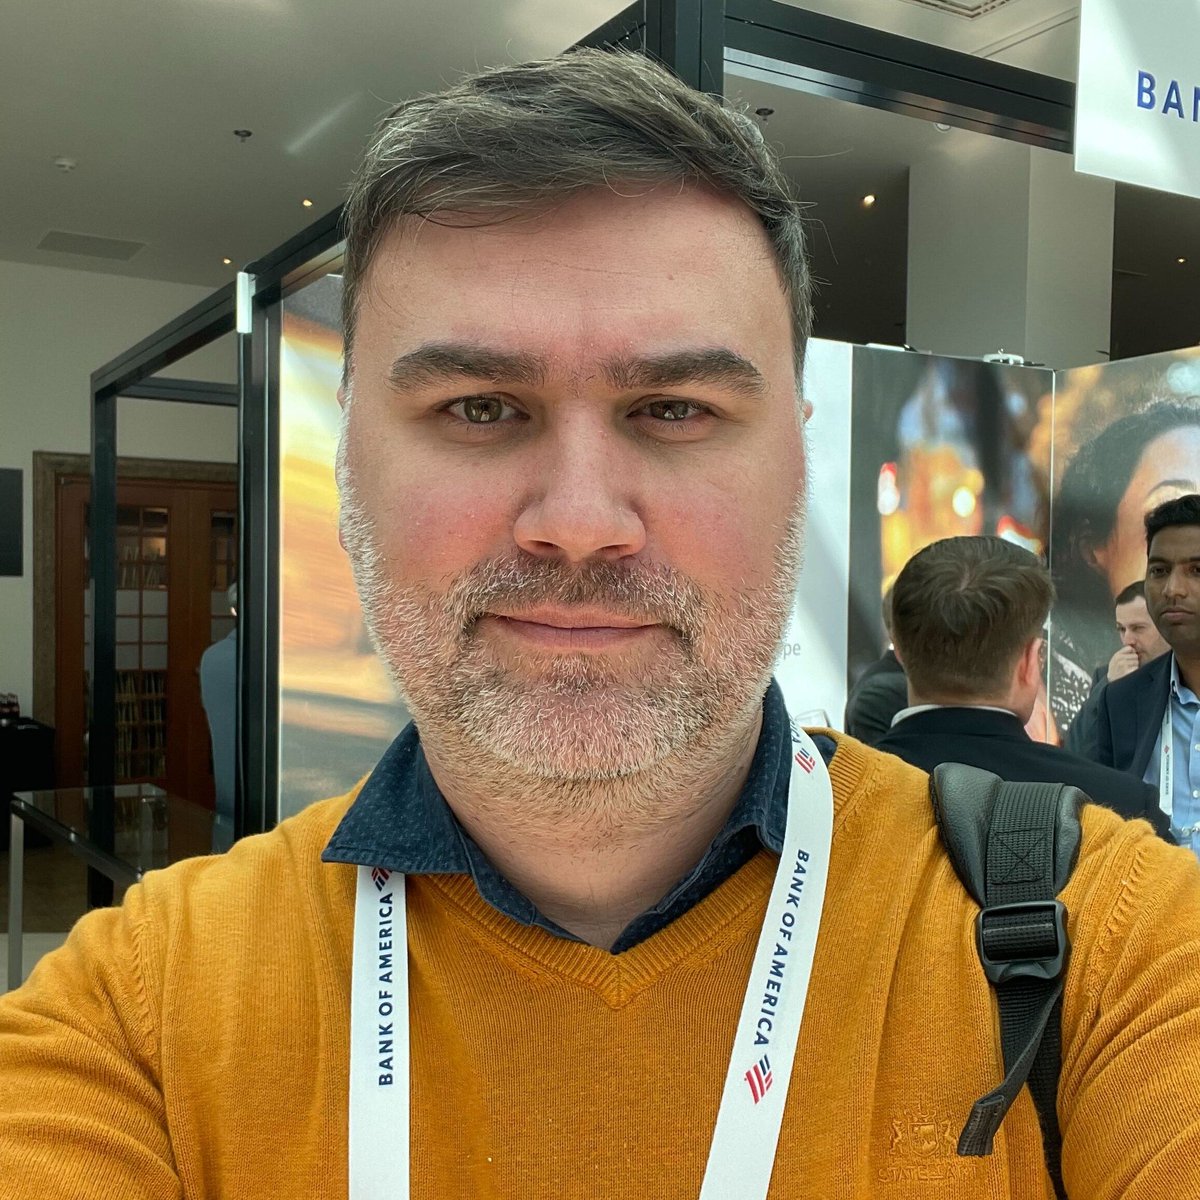 Our @DenysMelnykov is attending @mpecosystem in Berlin now 🇩🇪

He’d gladly discuss your payment challenges and help find the solutions.

Come and say hi!

#mpe #networking #merchantspaymentsecosystem